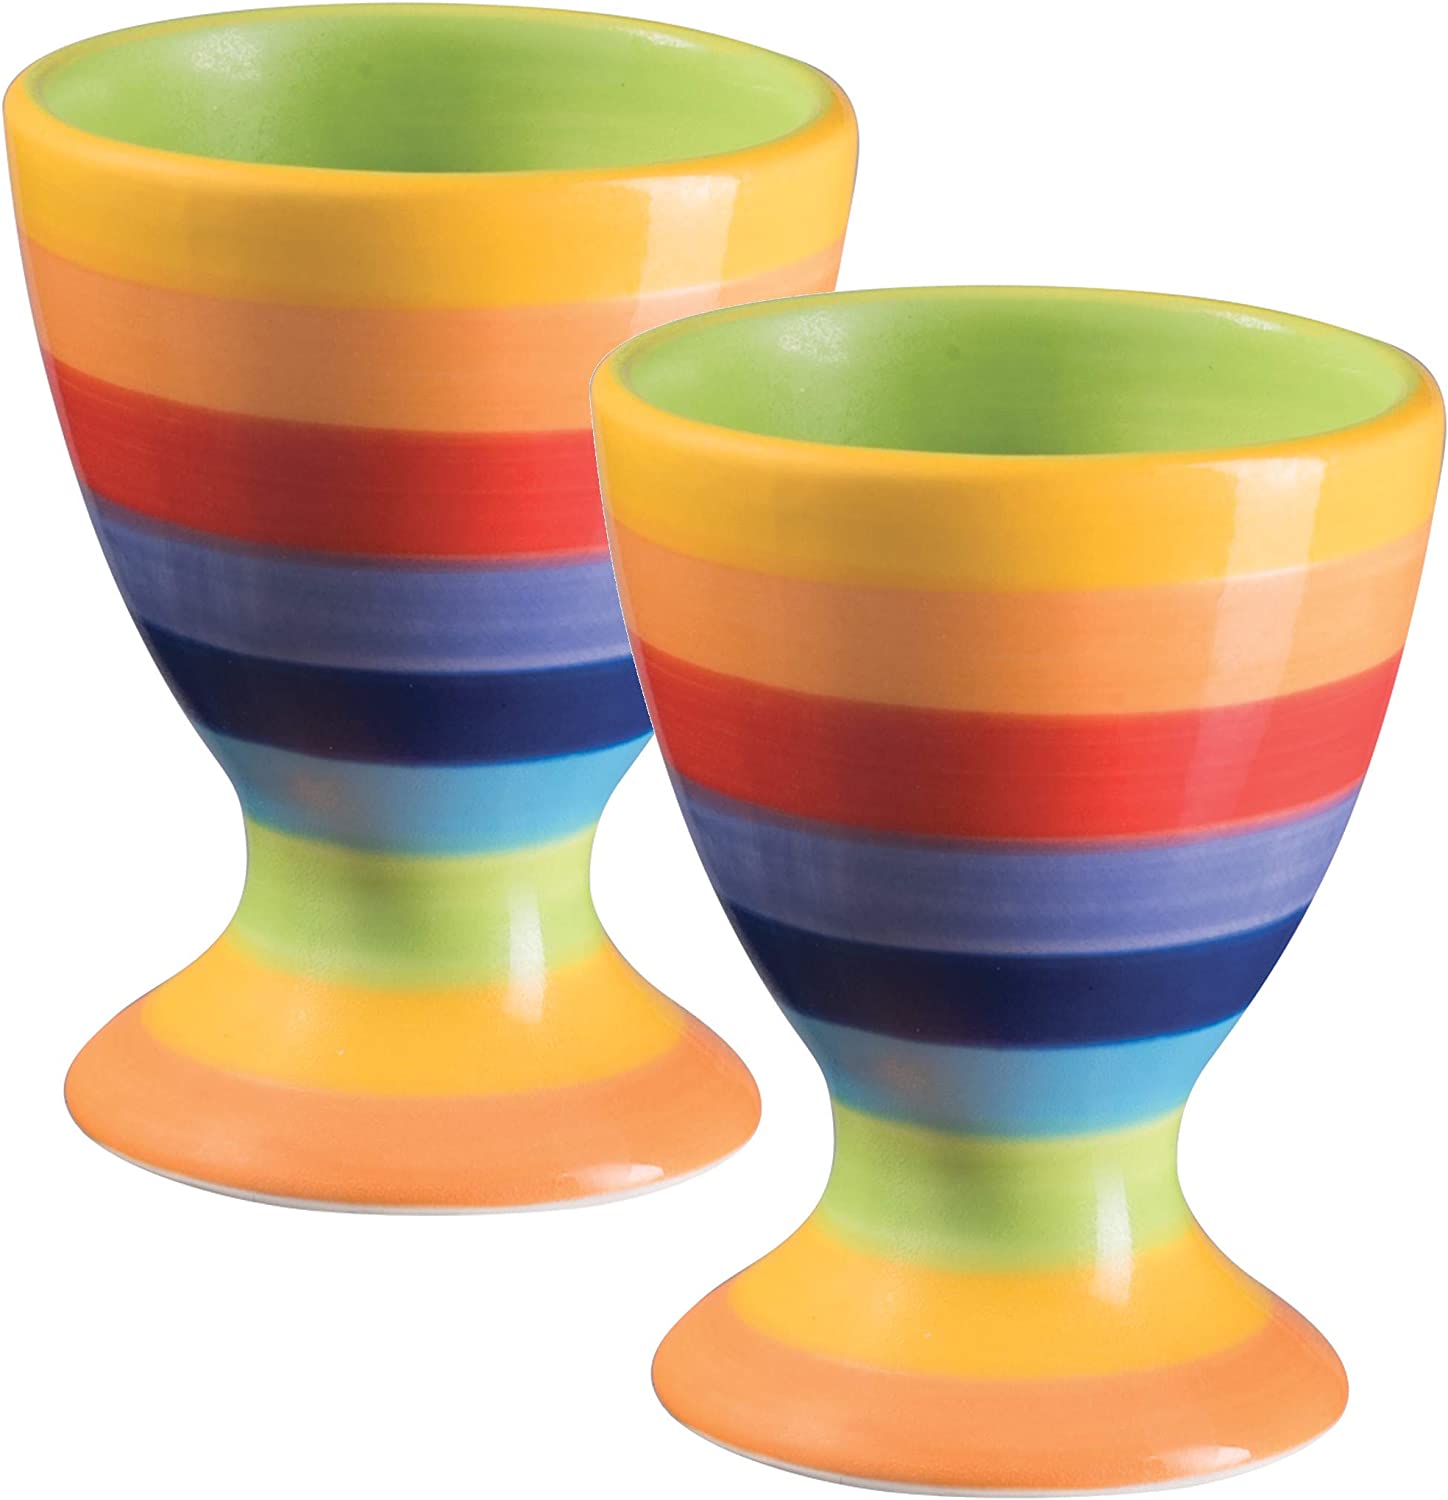 Purity Style Hand Painted Rainbow Stripe Egg Cups - Set of 2